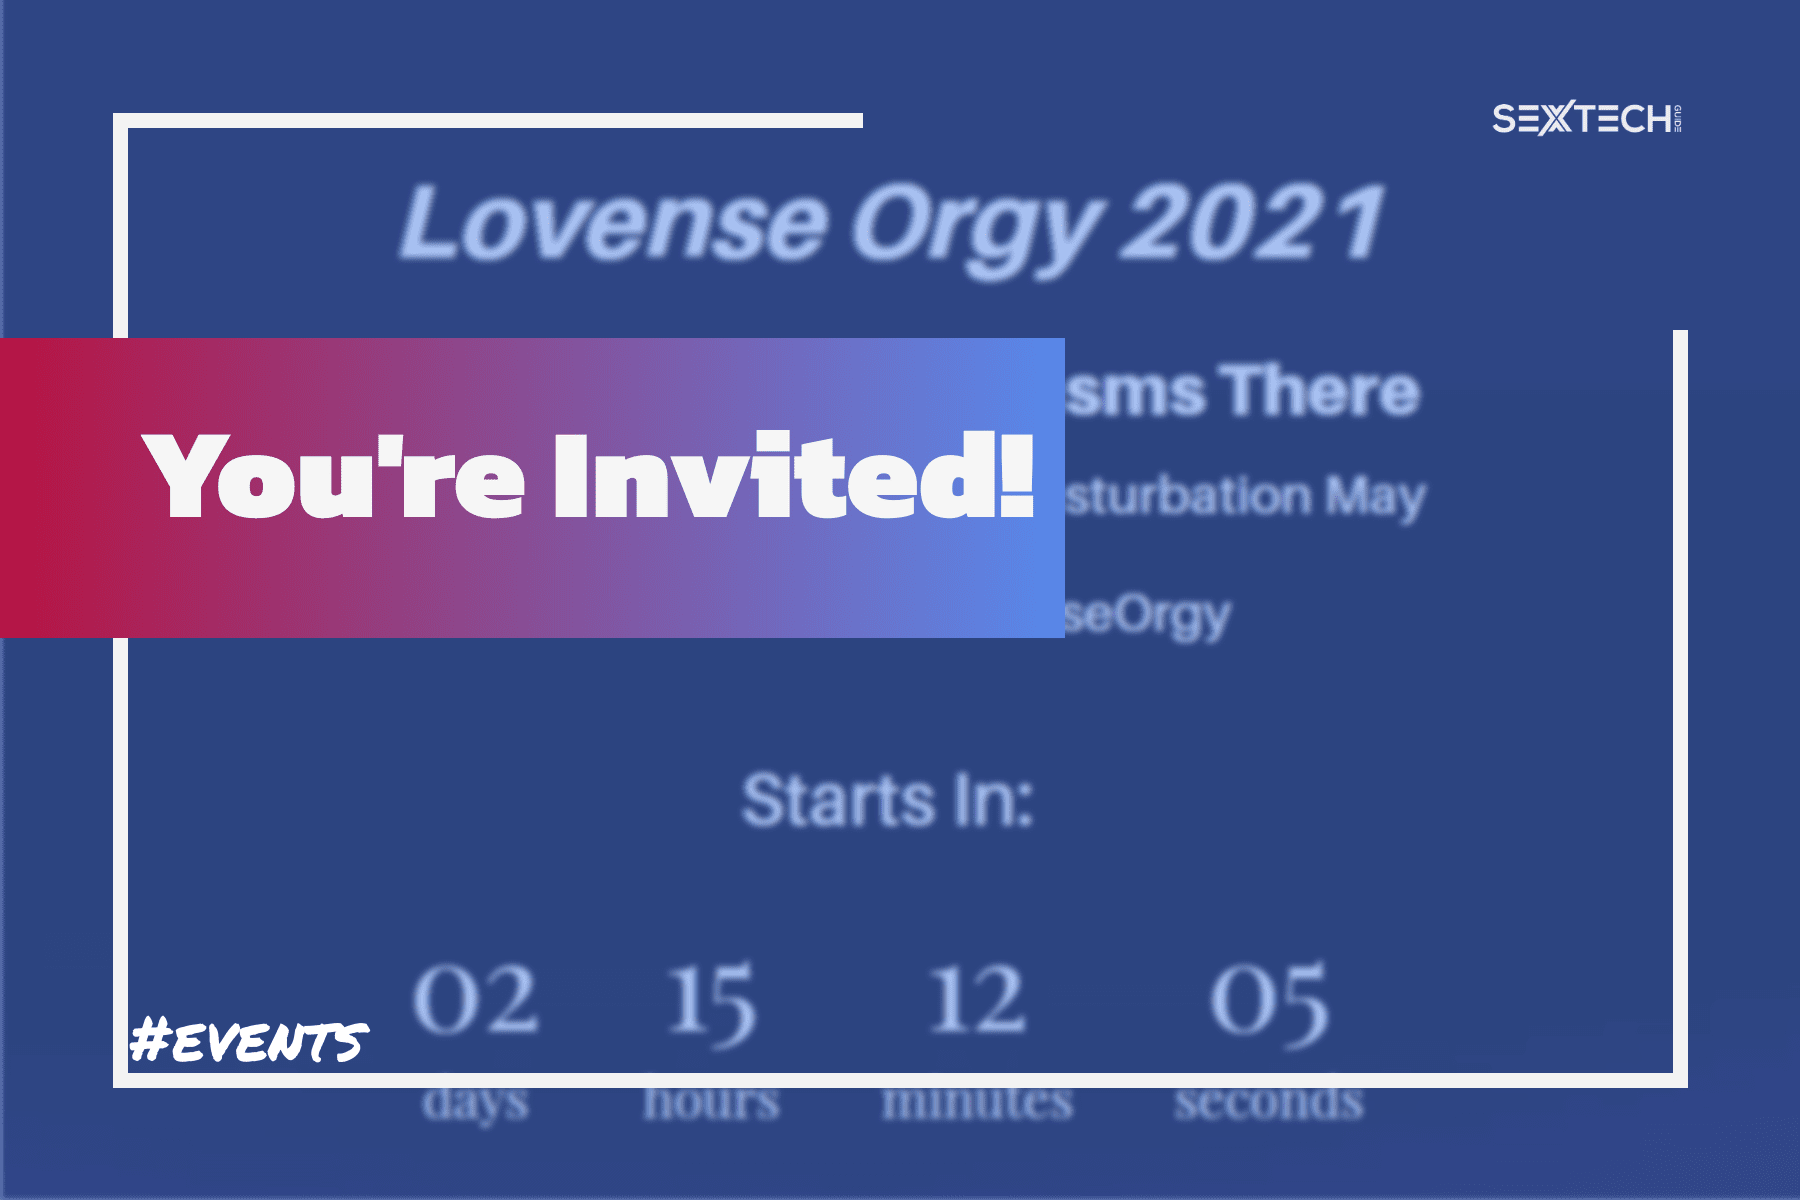 Lovense has organized a Twitter orgy for May 22